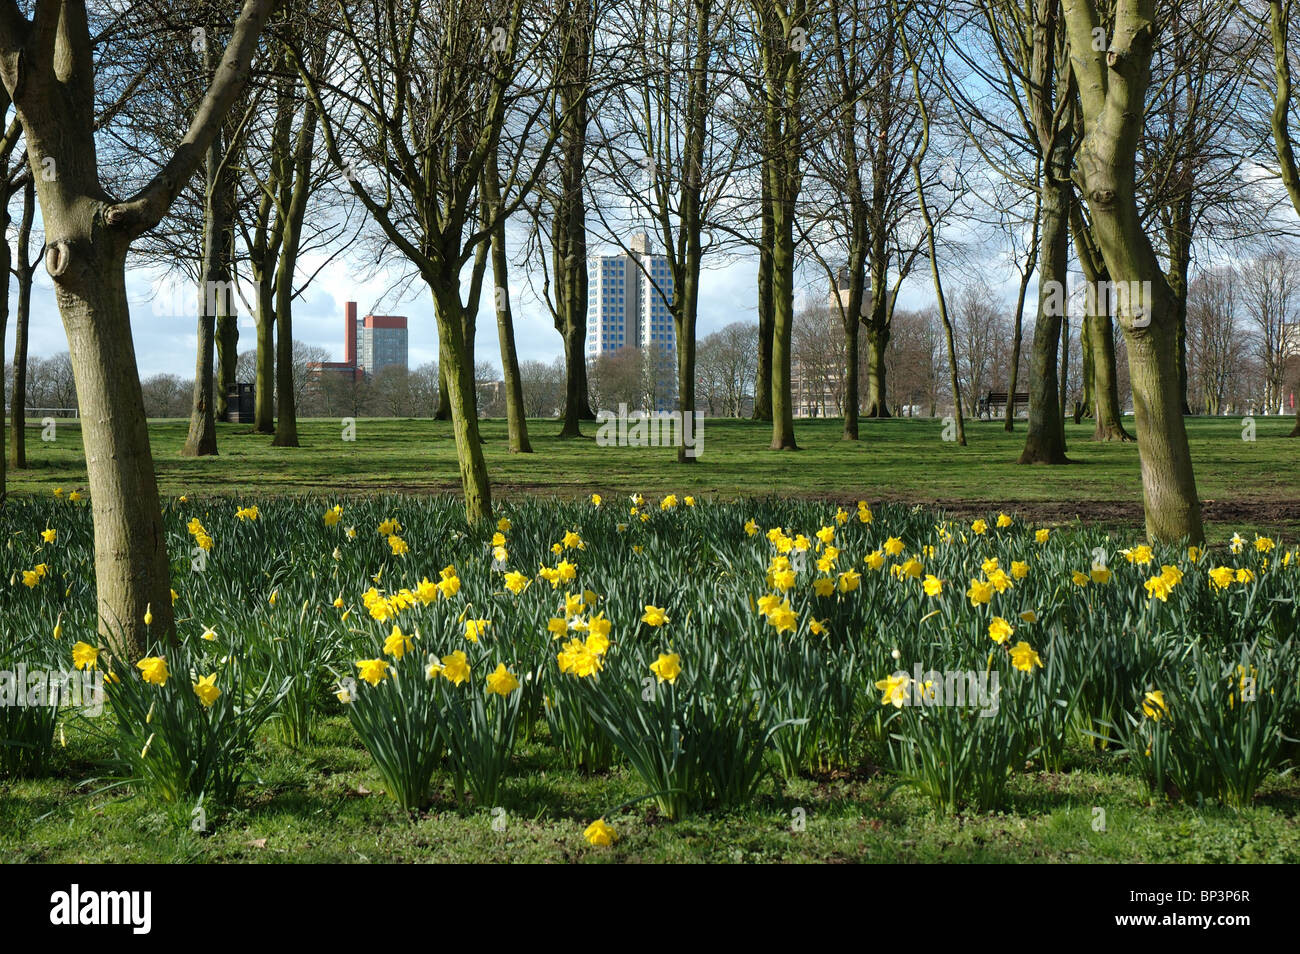 daffodils and University of Leicester buildings in the distance, Victoria Park, Leicester, England, UK Stock Photo